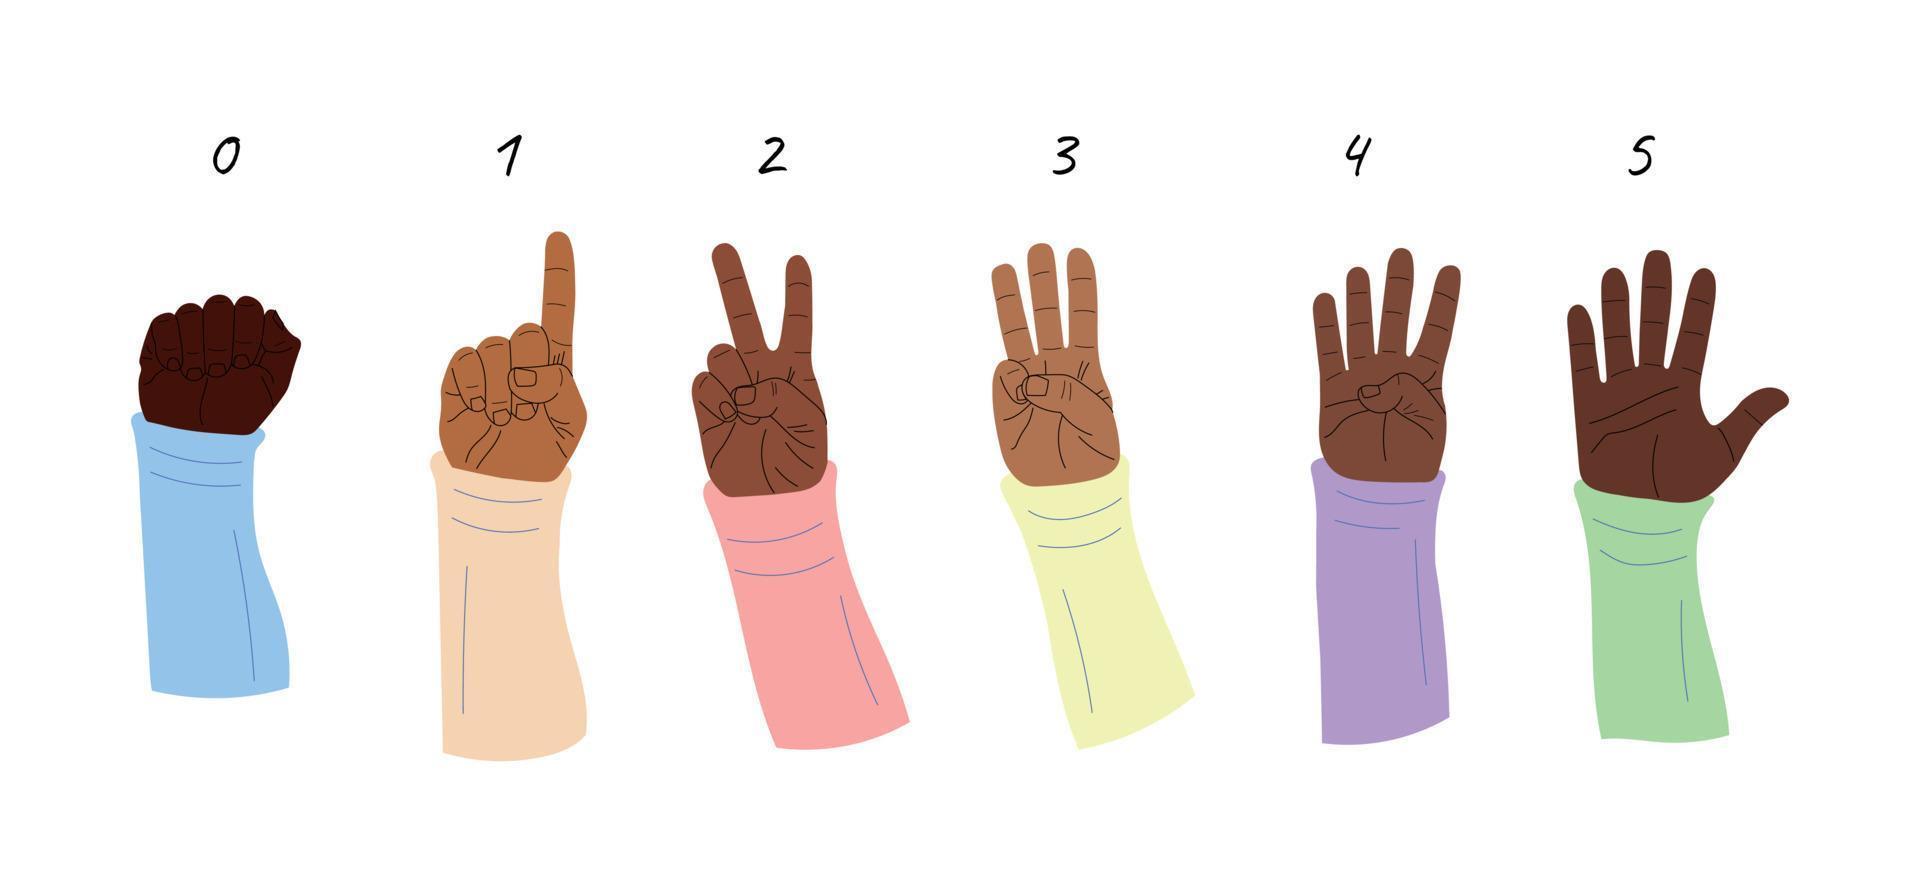 Hands counting by showing fingers. Hand drawn vector illustration.